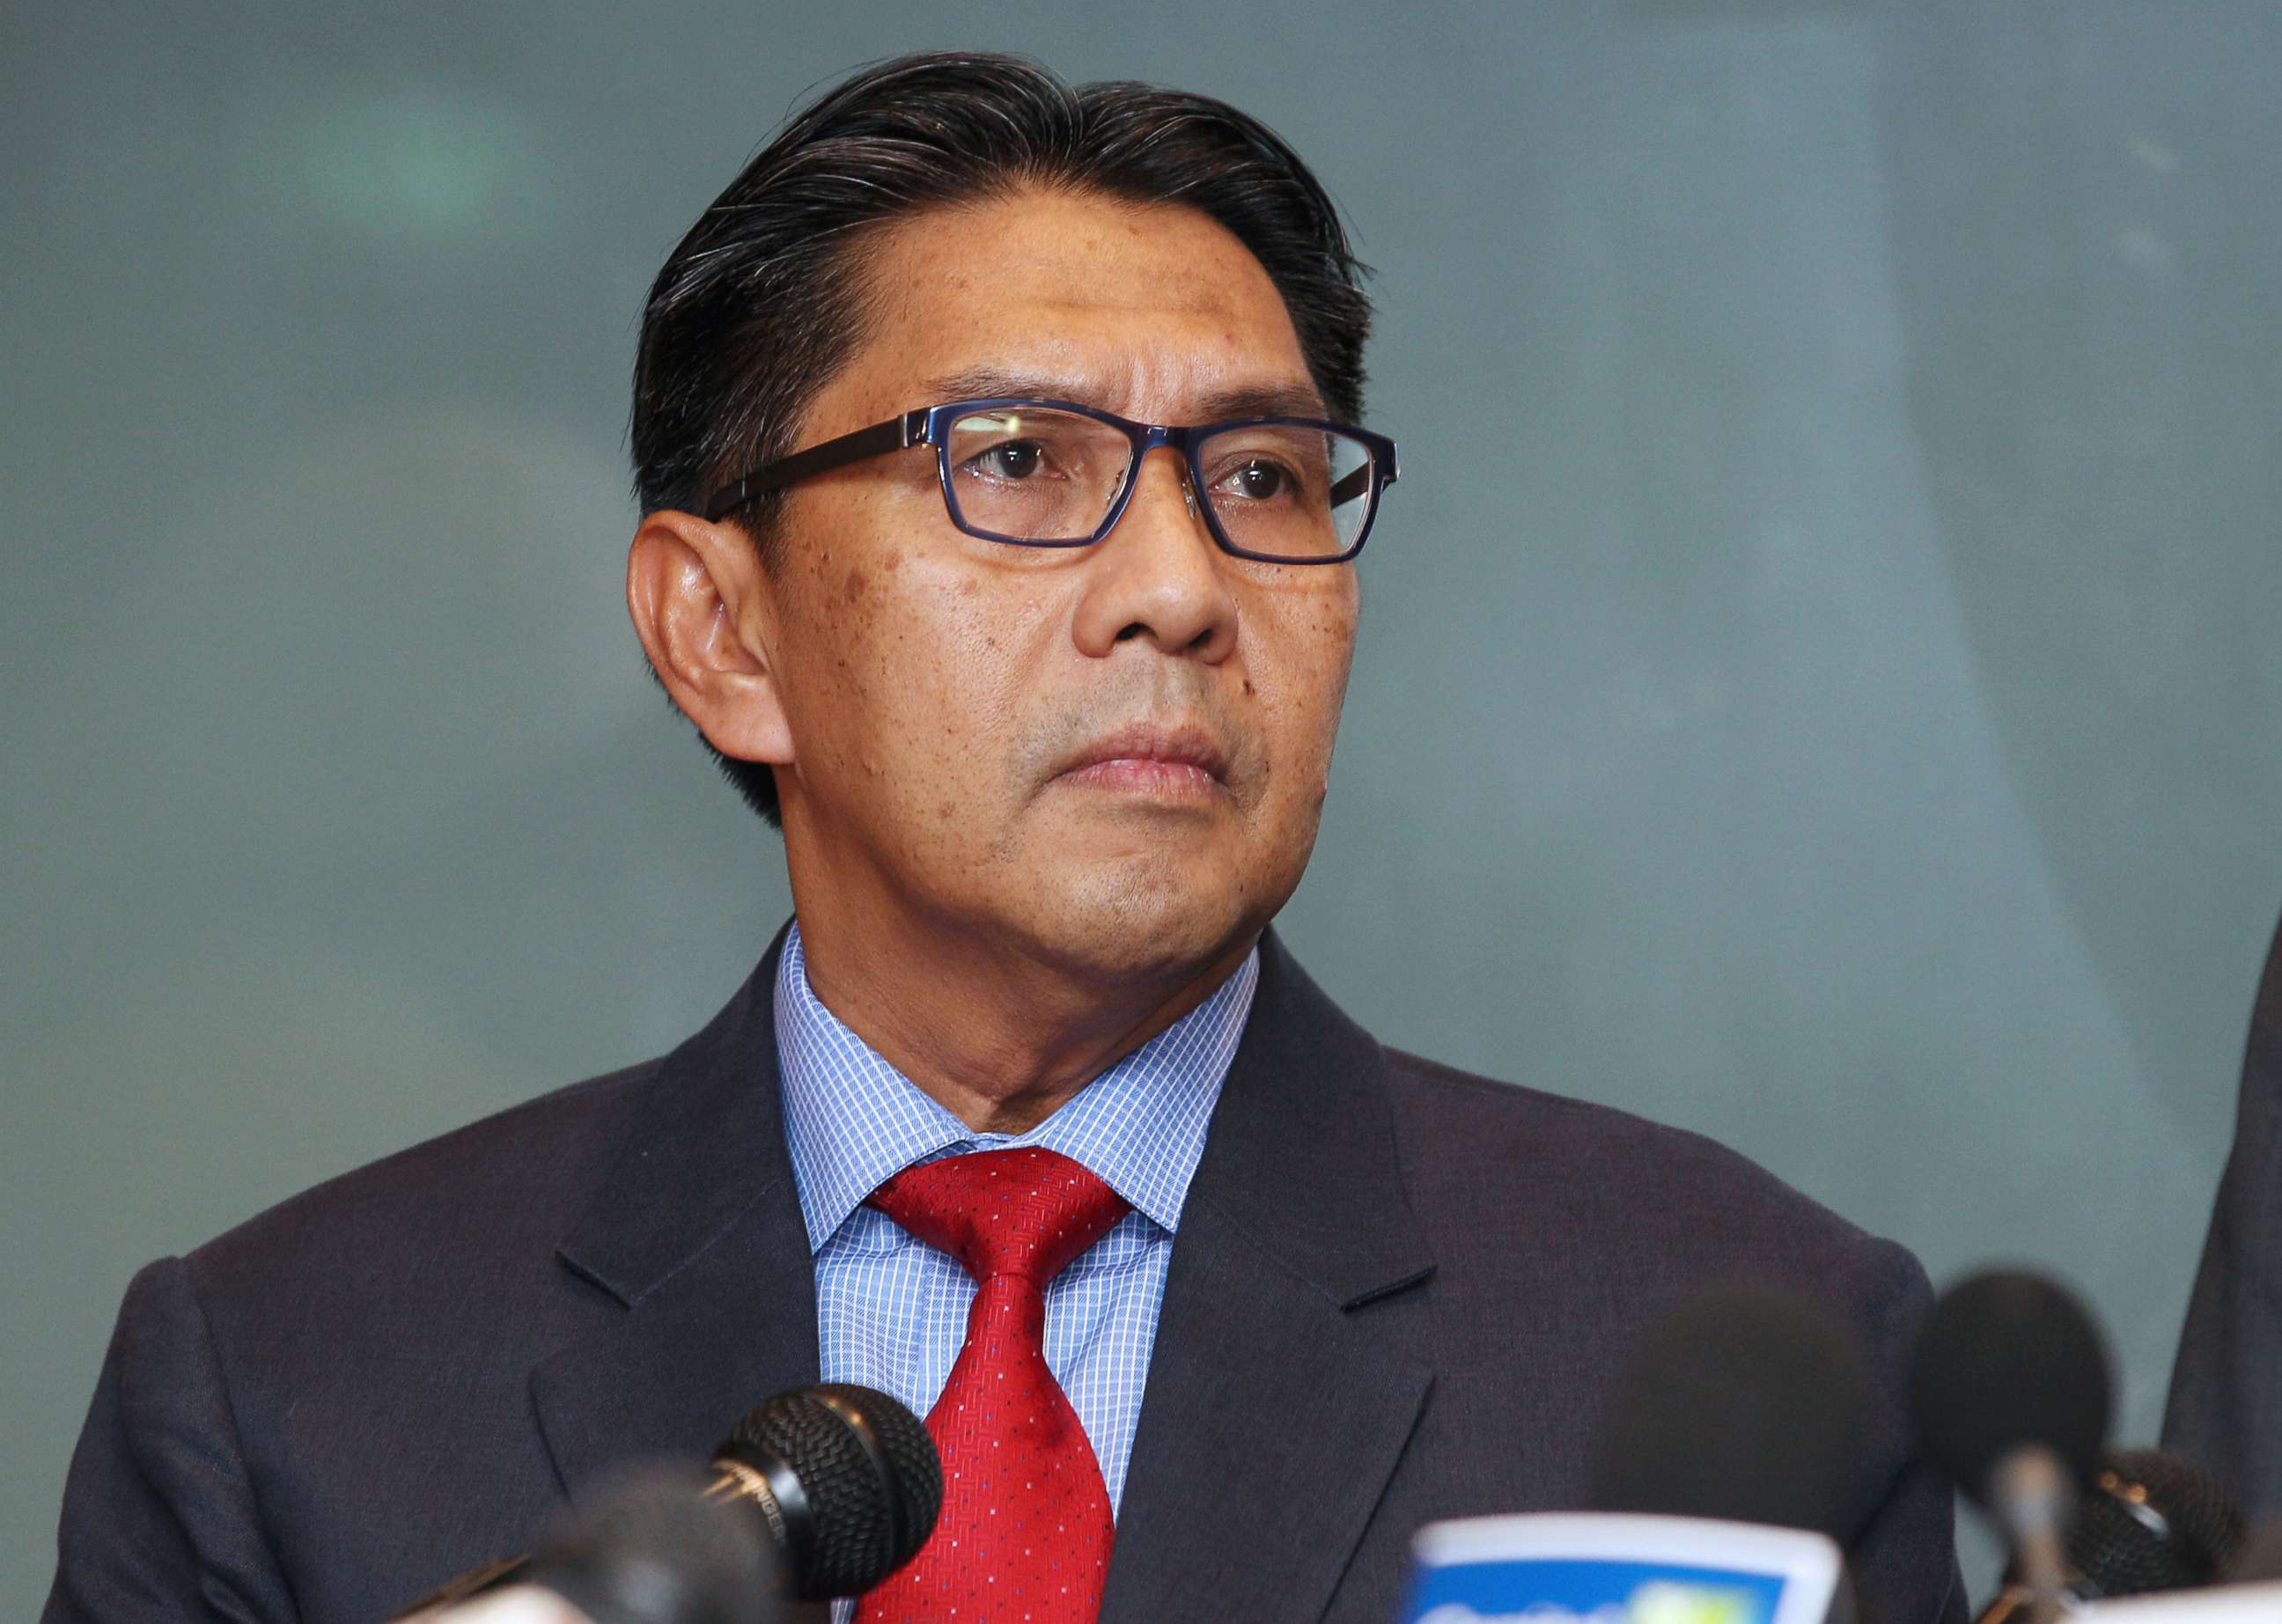 PHOTO: In this file photo, Azharuddin Abdul Rahman, director general of Malaysia's Department of Civil Aviation, pauses during a news conference in Sepang, Malaysia, March 20, 2014.